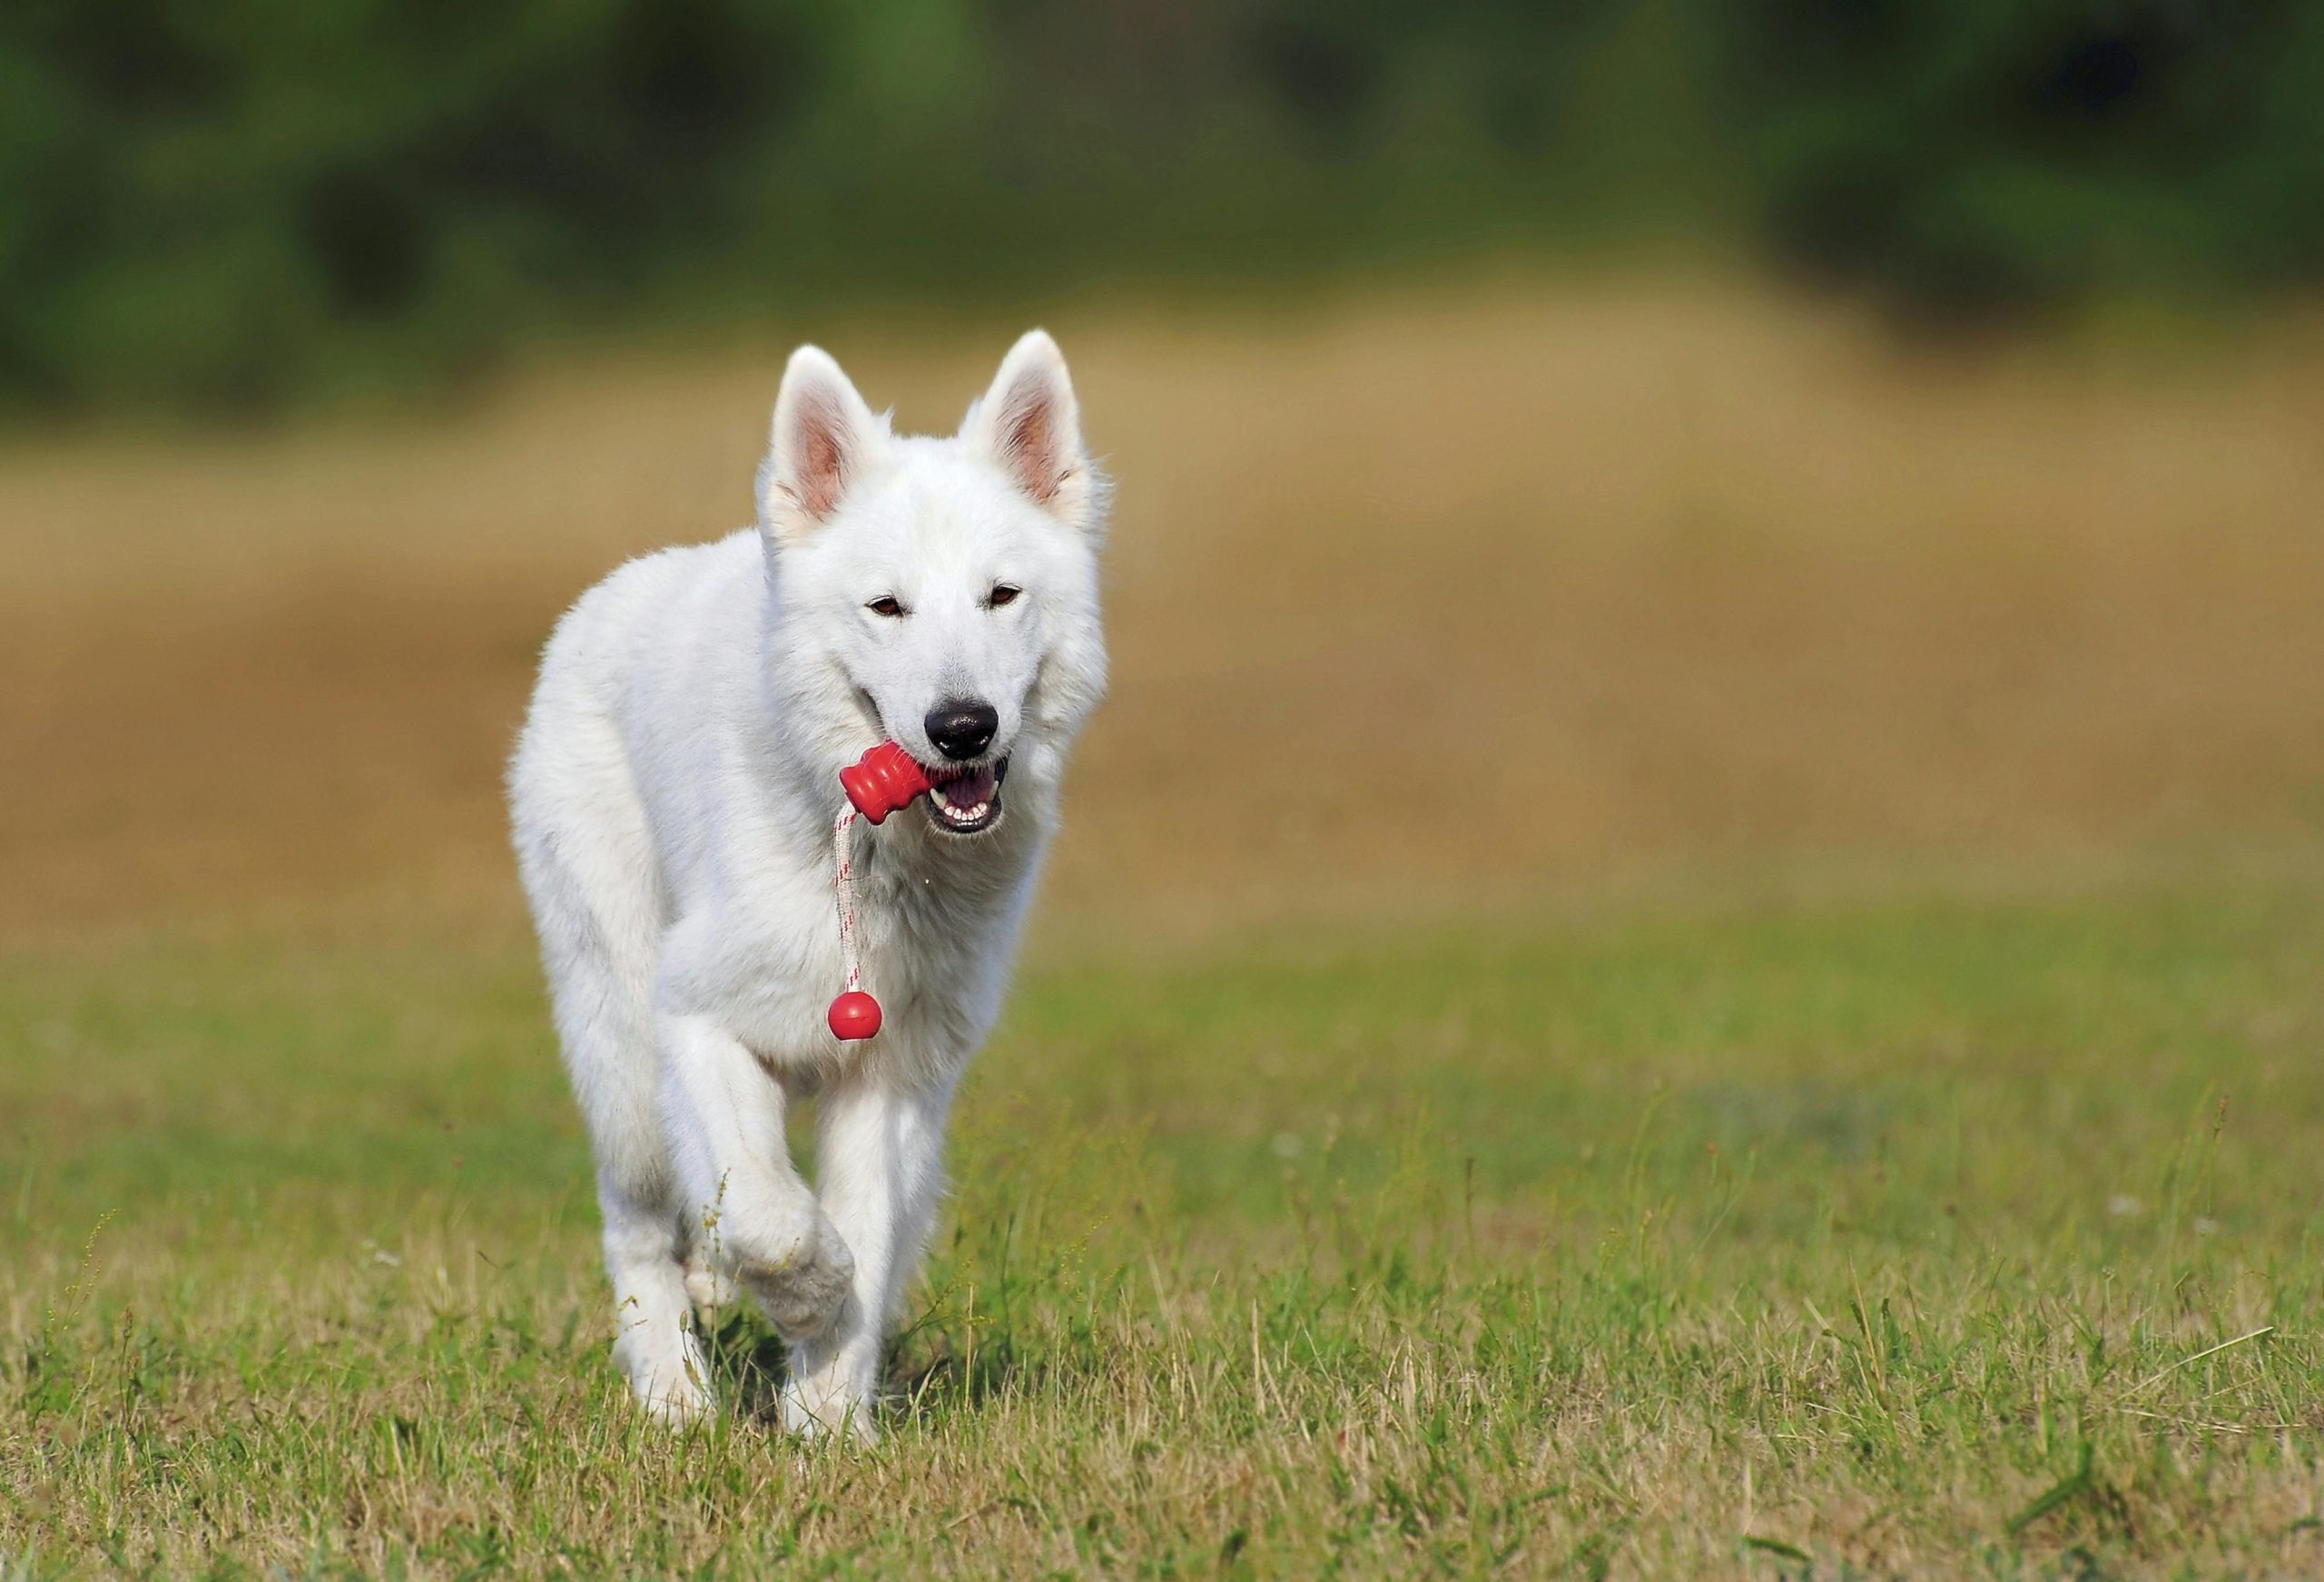 7 Fun Ways to Keep Your Dog Mentally Stimulated